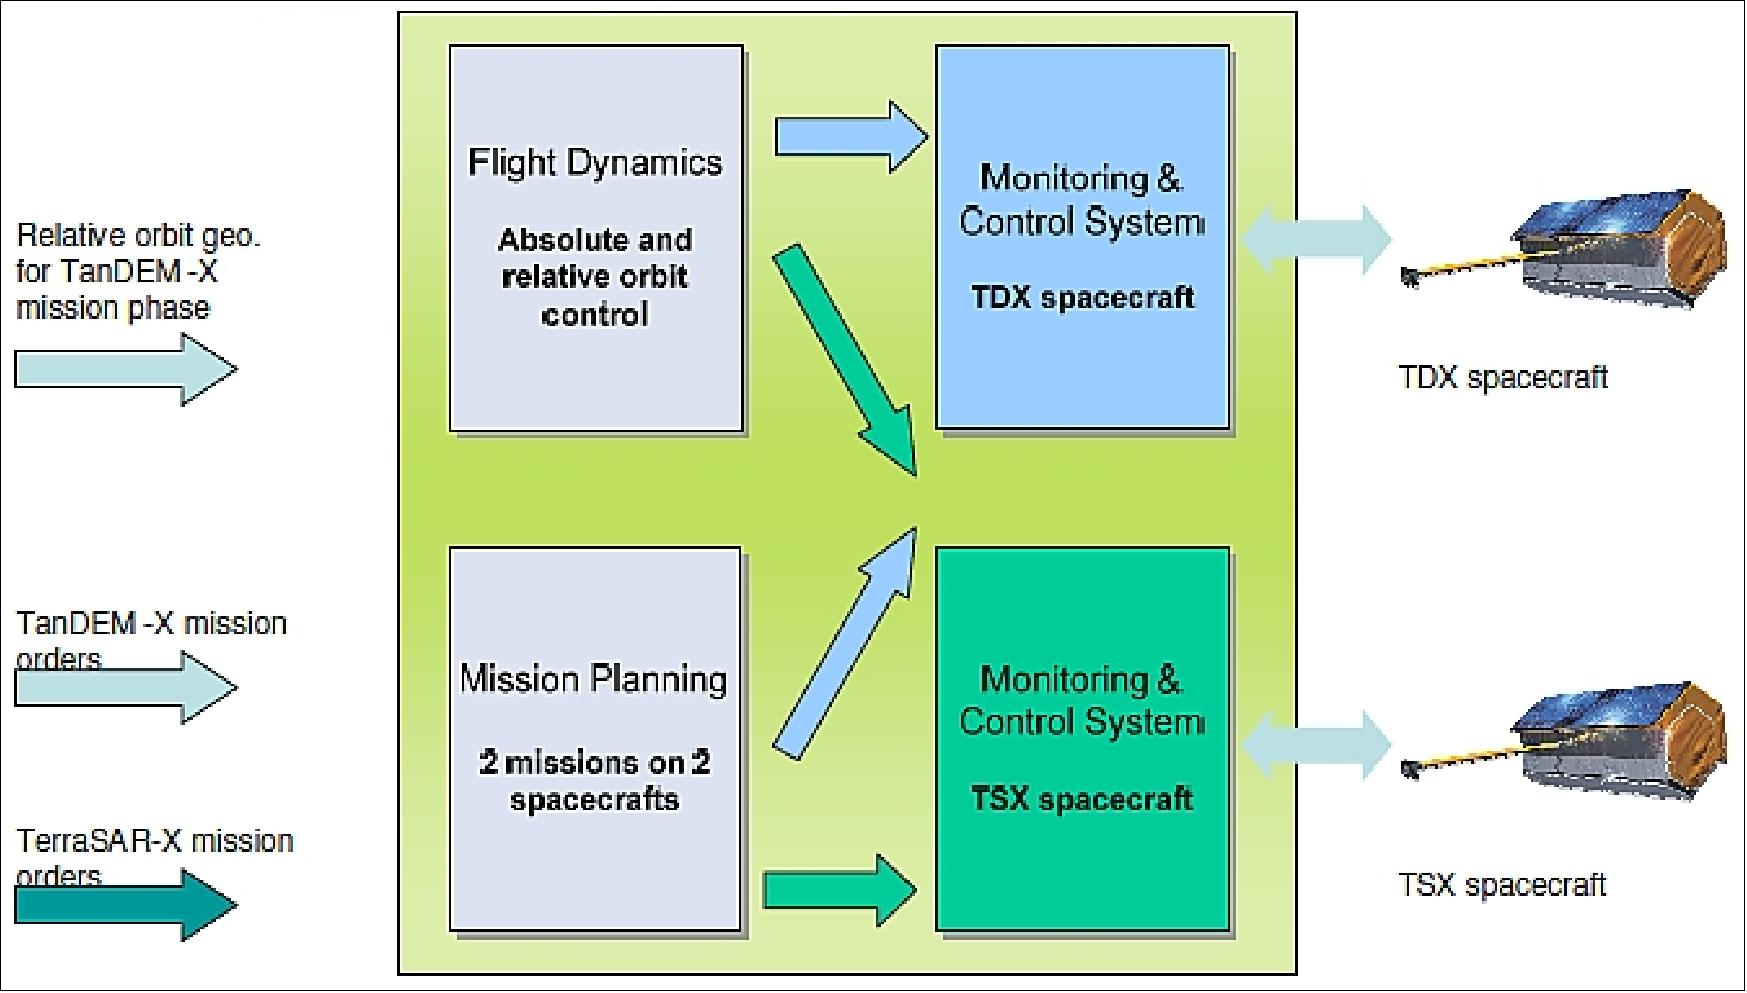 Figure 92: Schematic, simplified workflow for dual satellite/dual mission operations (image credit: DLR)